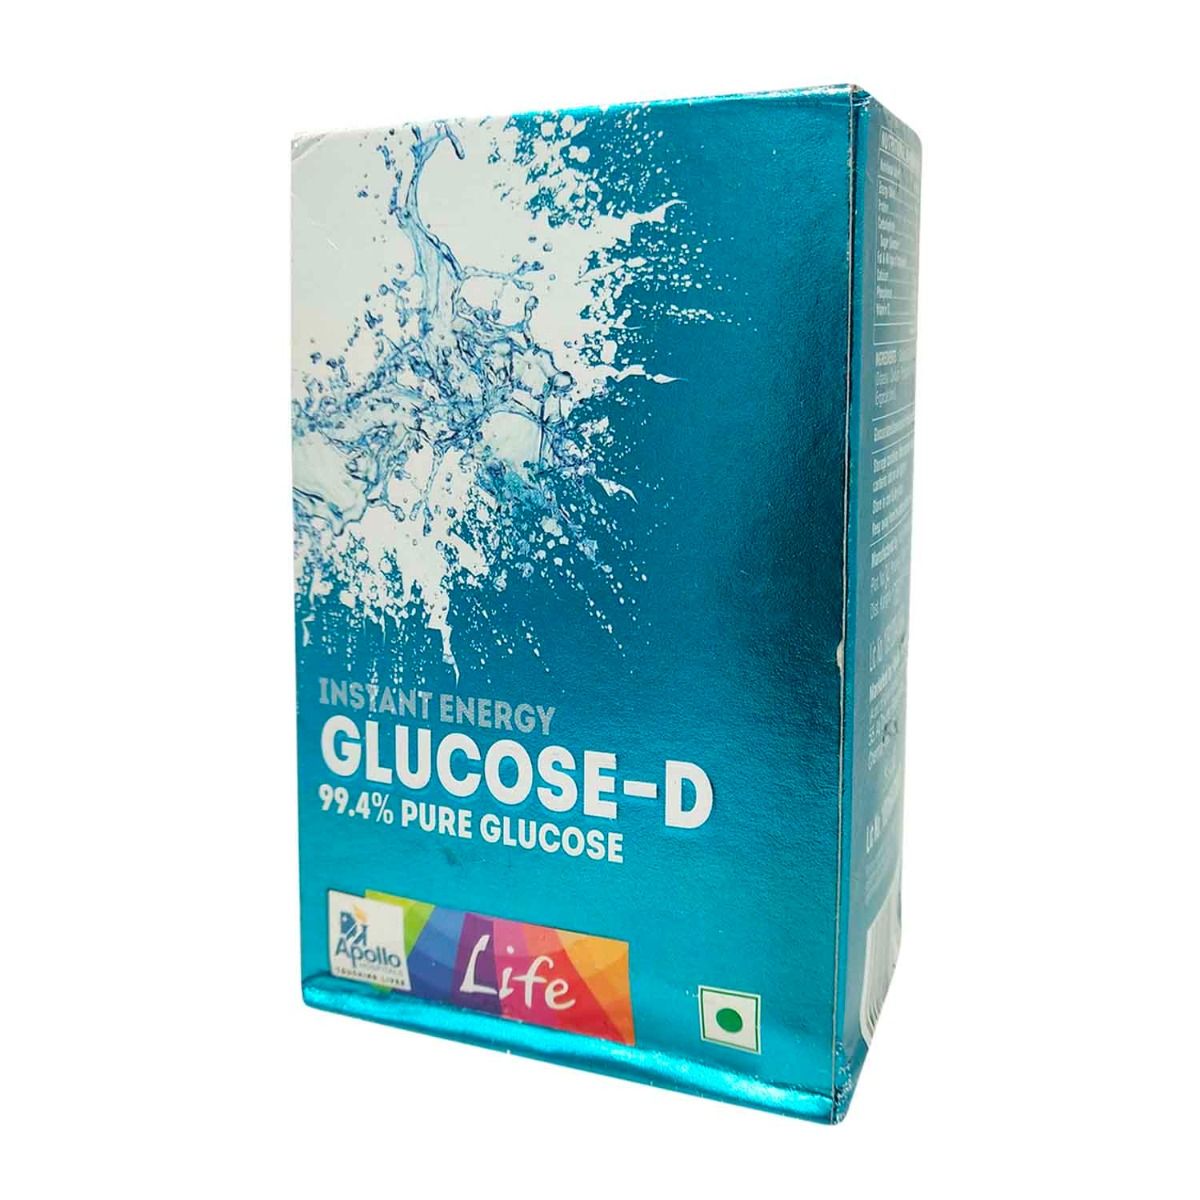 Apollo Life Glucose-D Instant Energy Drink, 500 gm Refill Pack, Pack of 1 